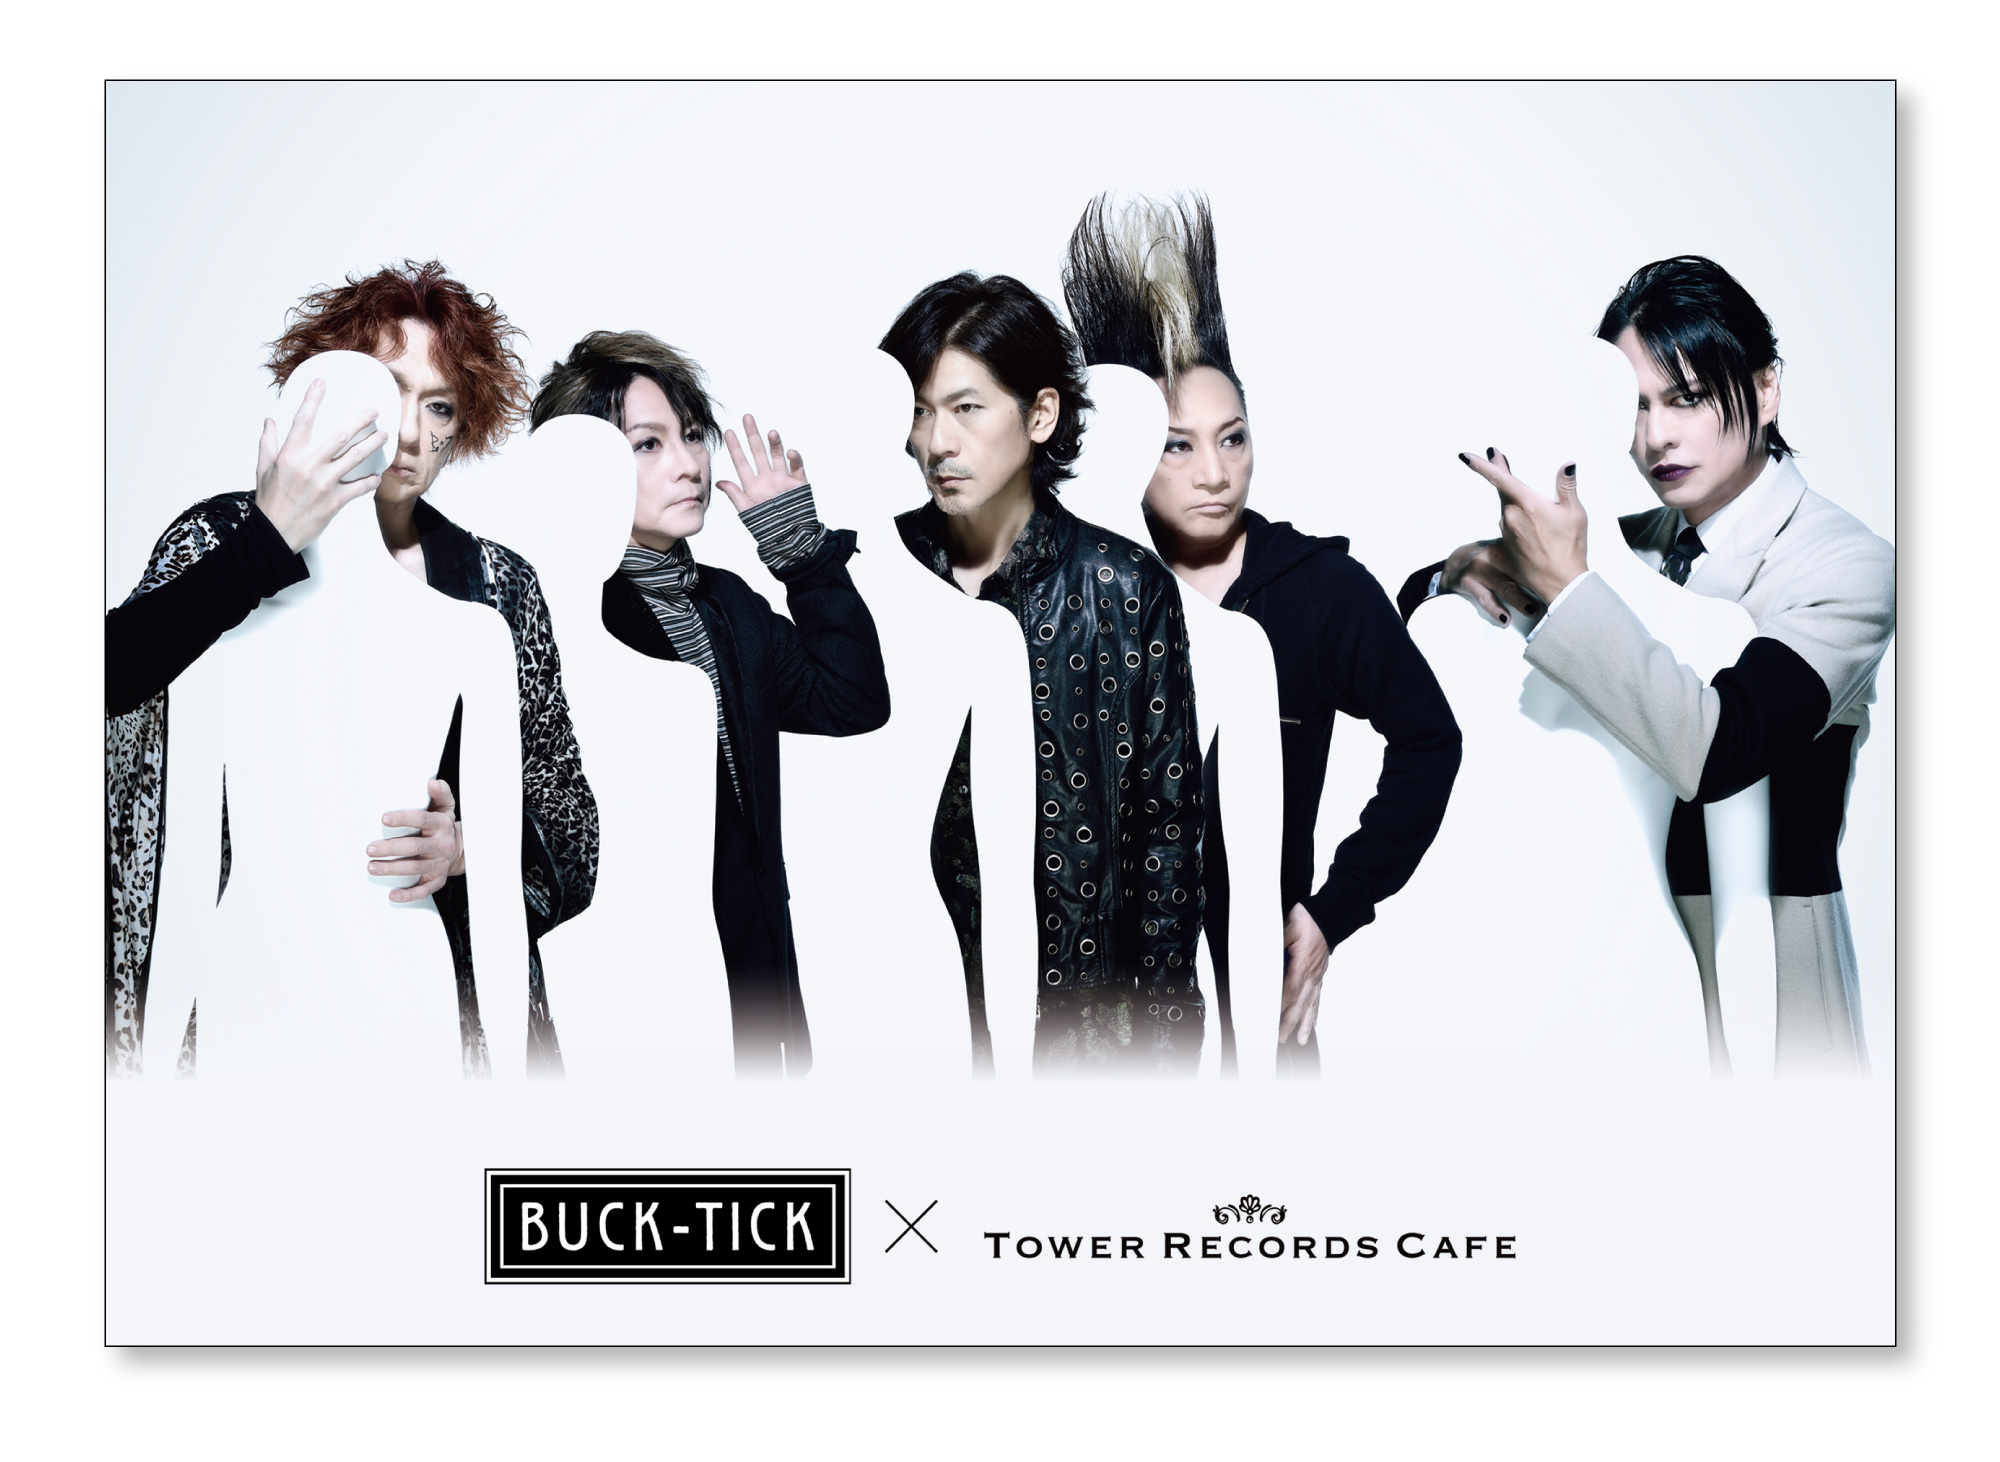 BUCK-TICK×TOWER RECORDS CAFE 2020年1月7日より開催決定！ - TOWER ...